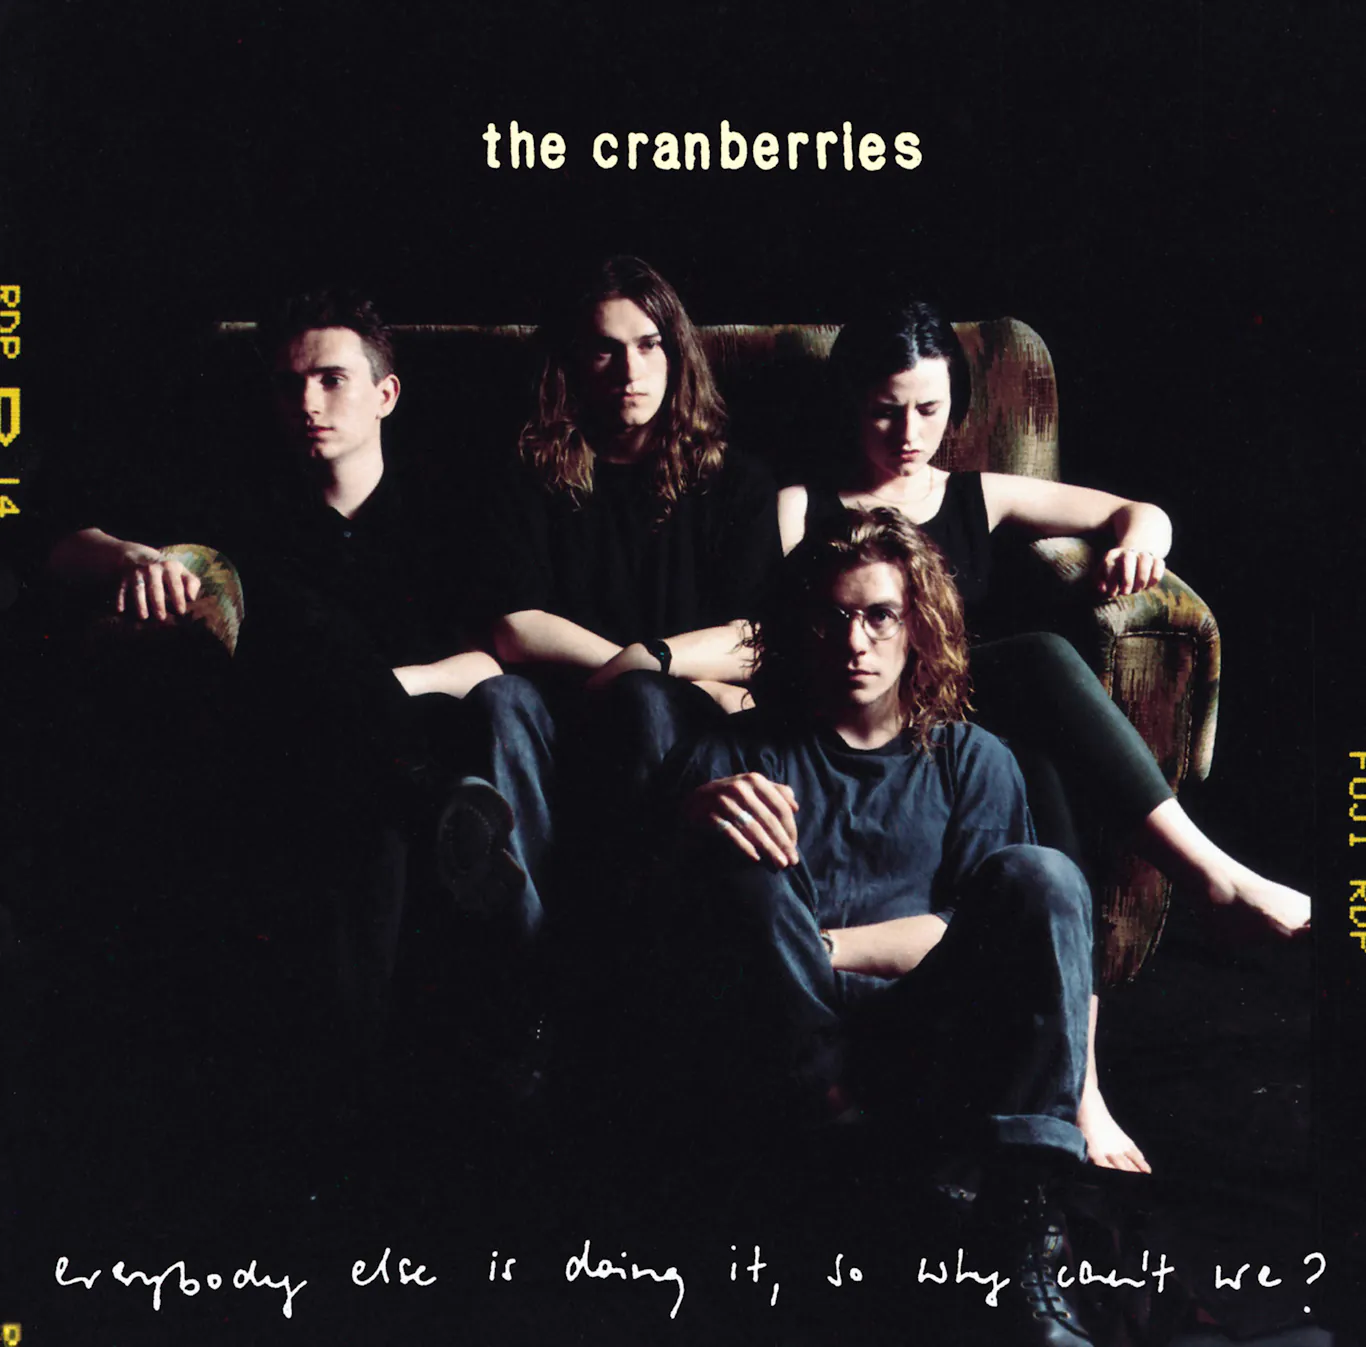 THE CRANBERRIES celebrate 30th anniversary of debut album with immersive Atmos mixes